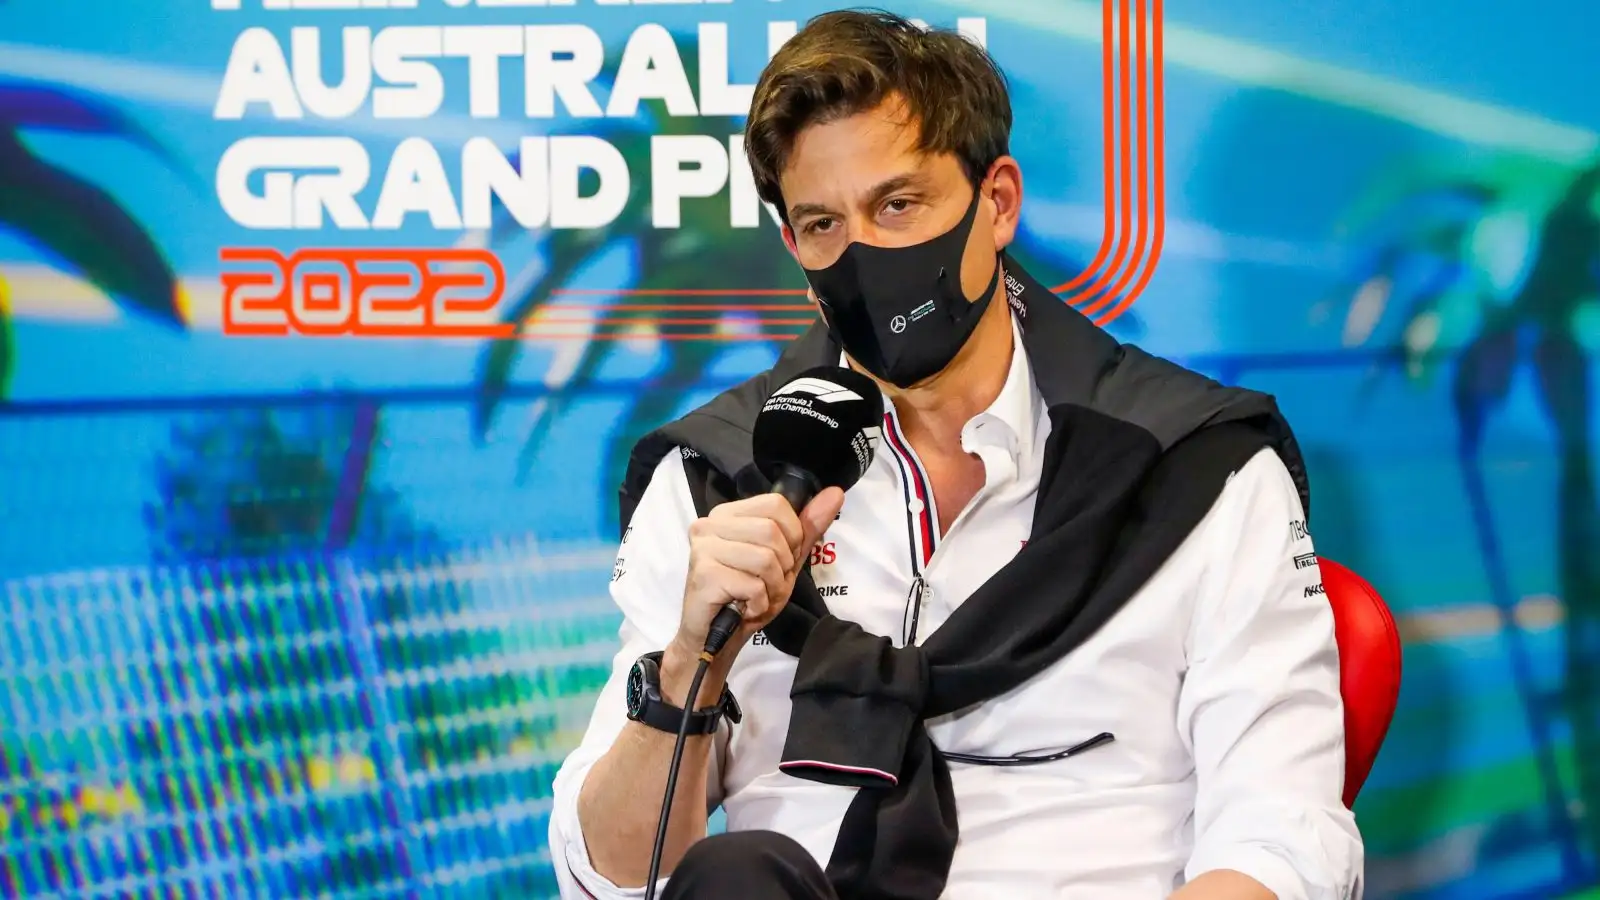 Toto Wolff at a press conference. Melbourne, April 2022.